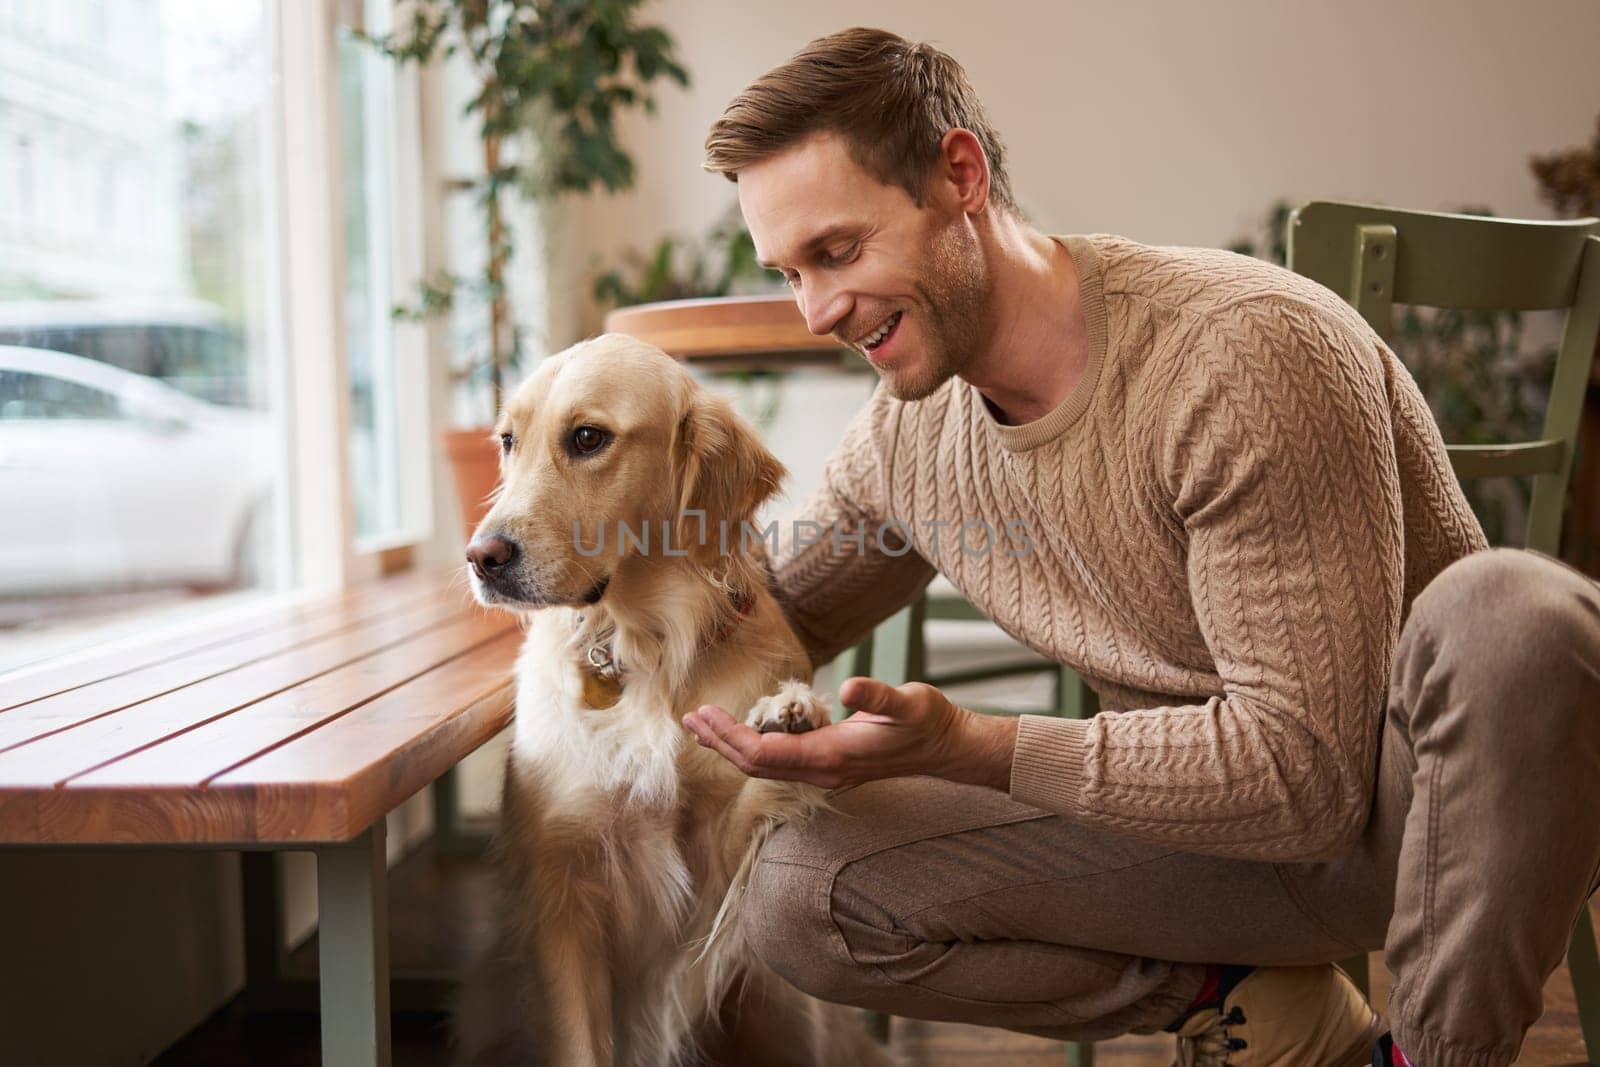 Close up portrait of cute smart dog gives paw to his owner. Handsome man with his golden retriever sitting in a pet friendly cafe.